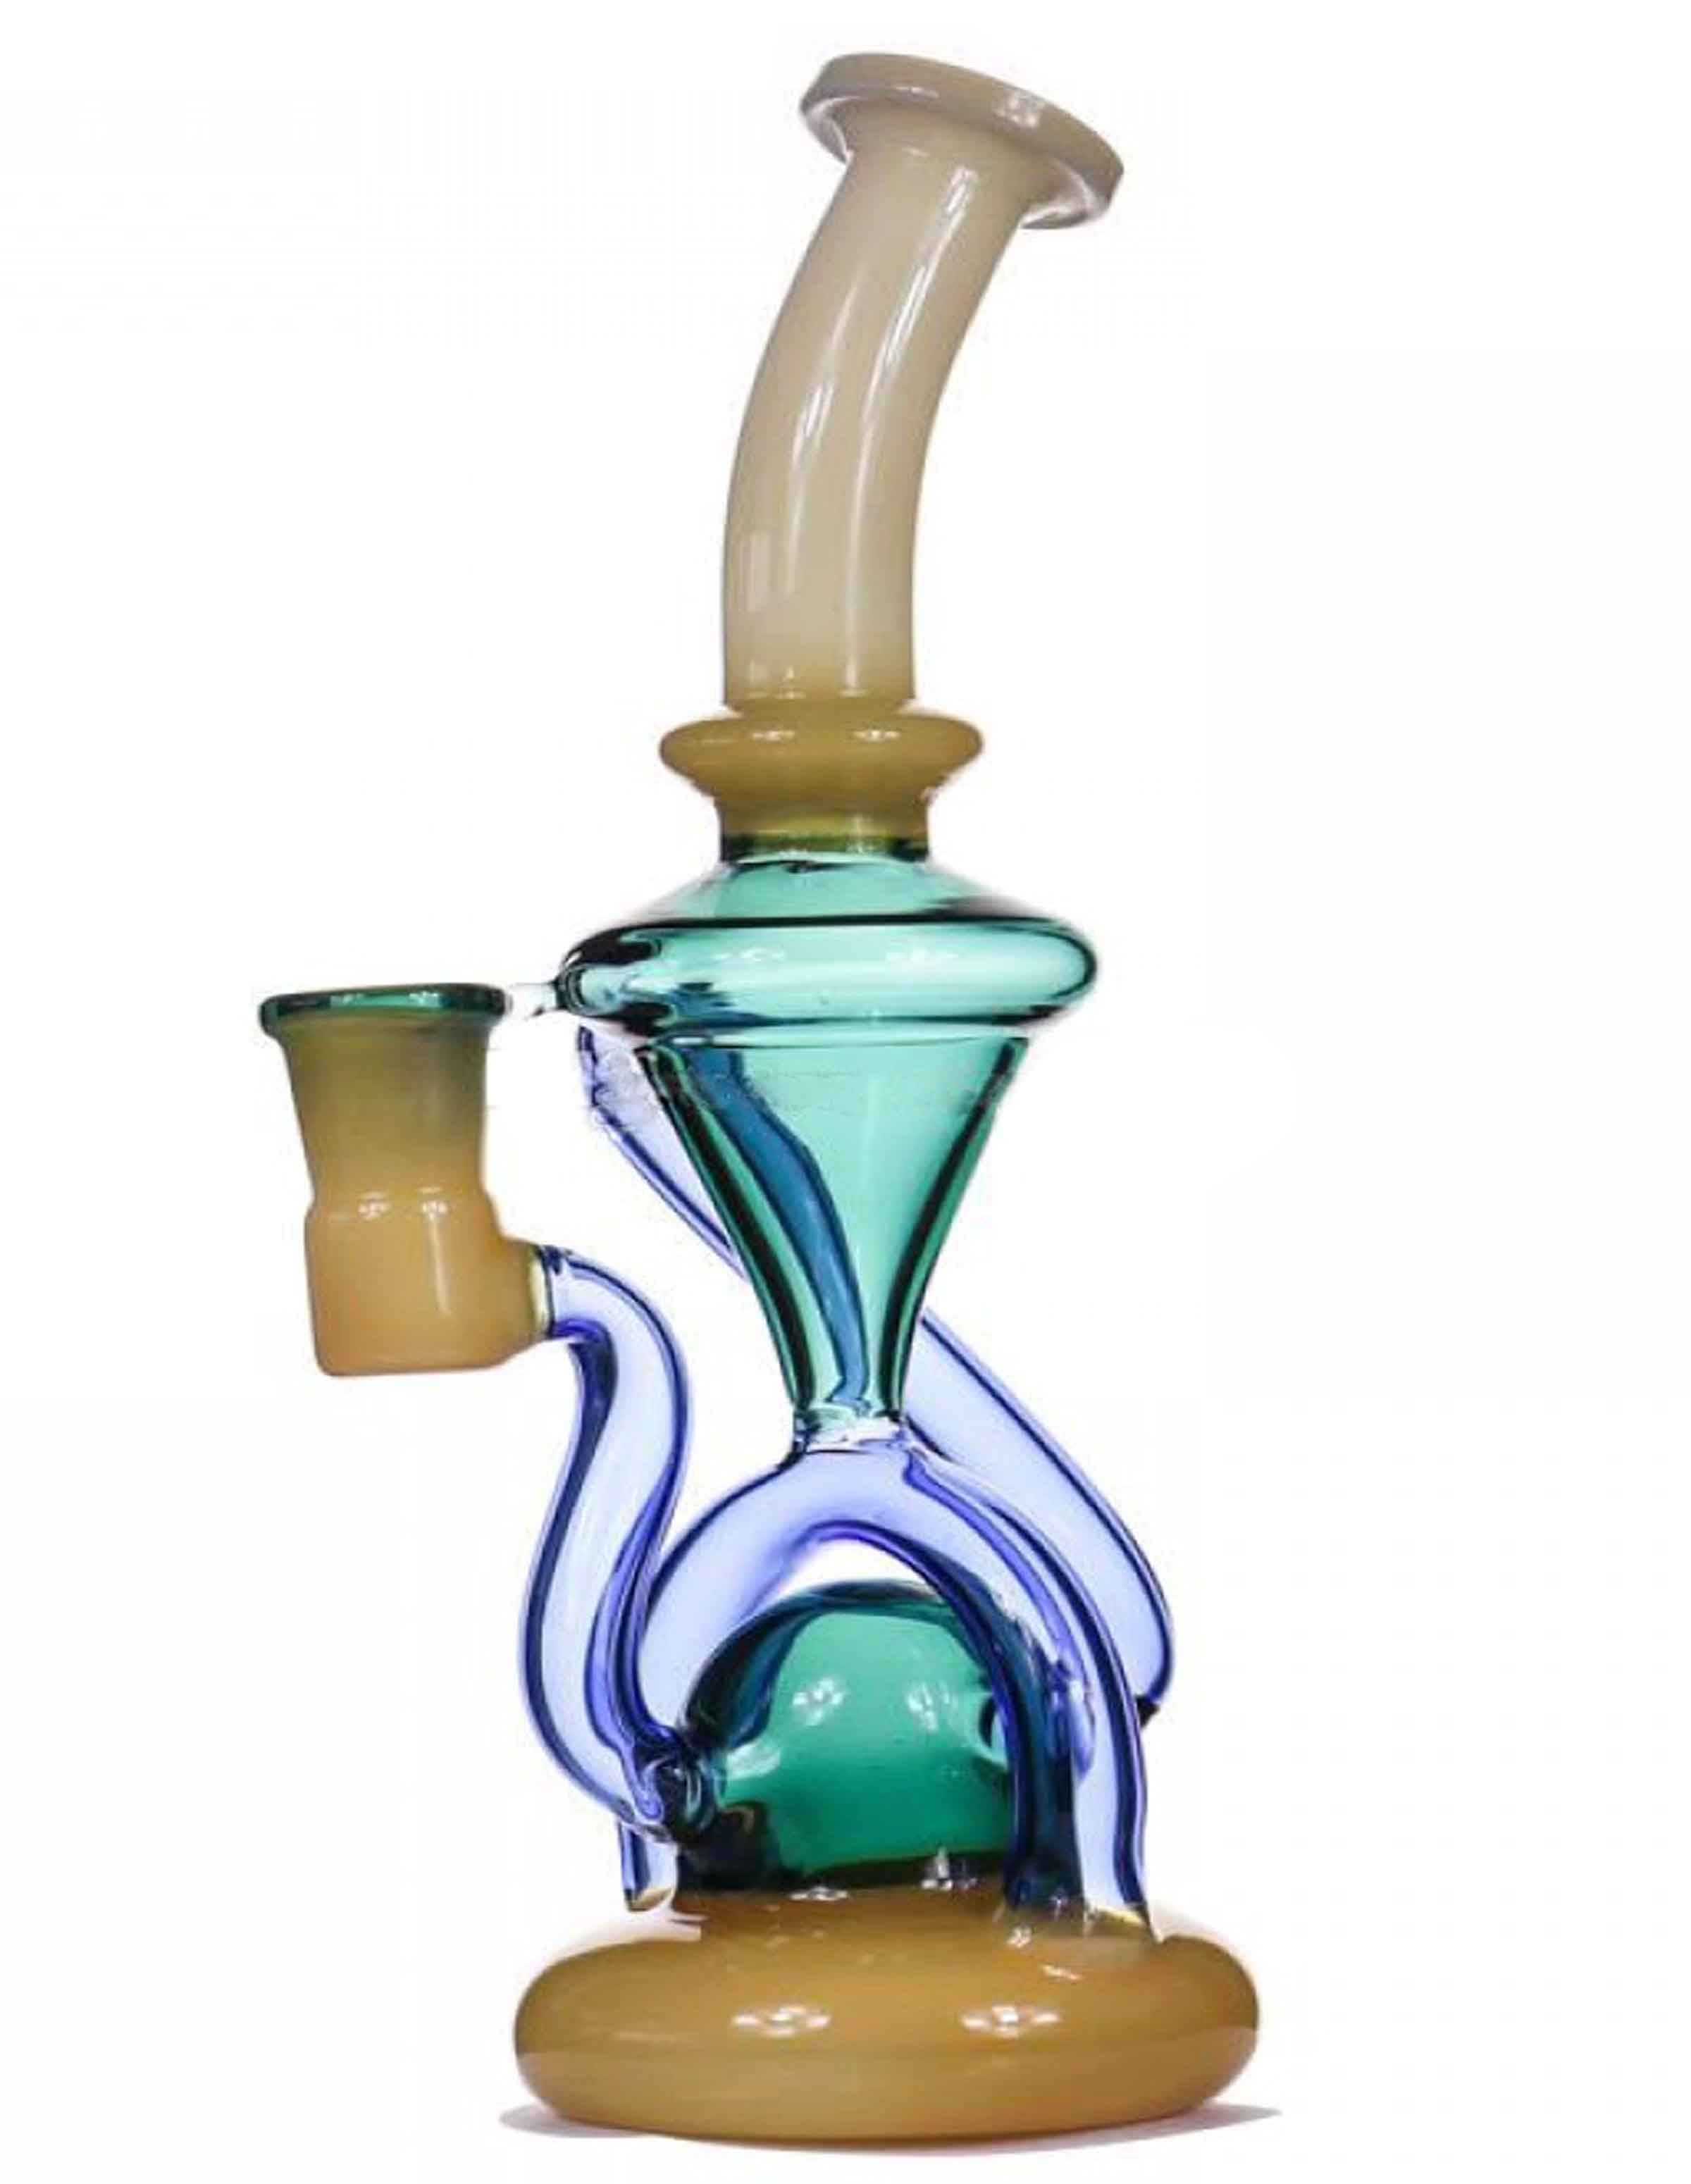 9"Vortex Dab Rig New Recycler Oil Rigs Wax Water Bong Pipe